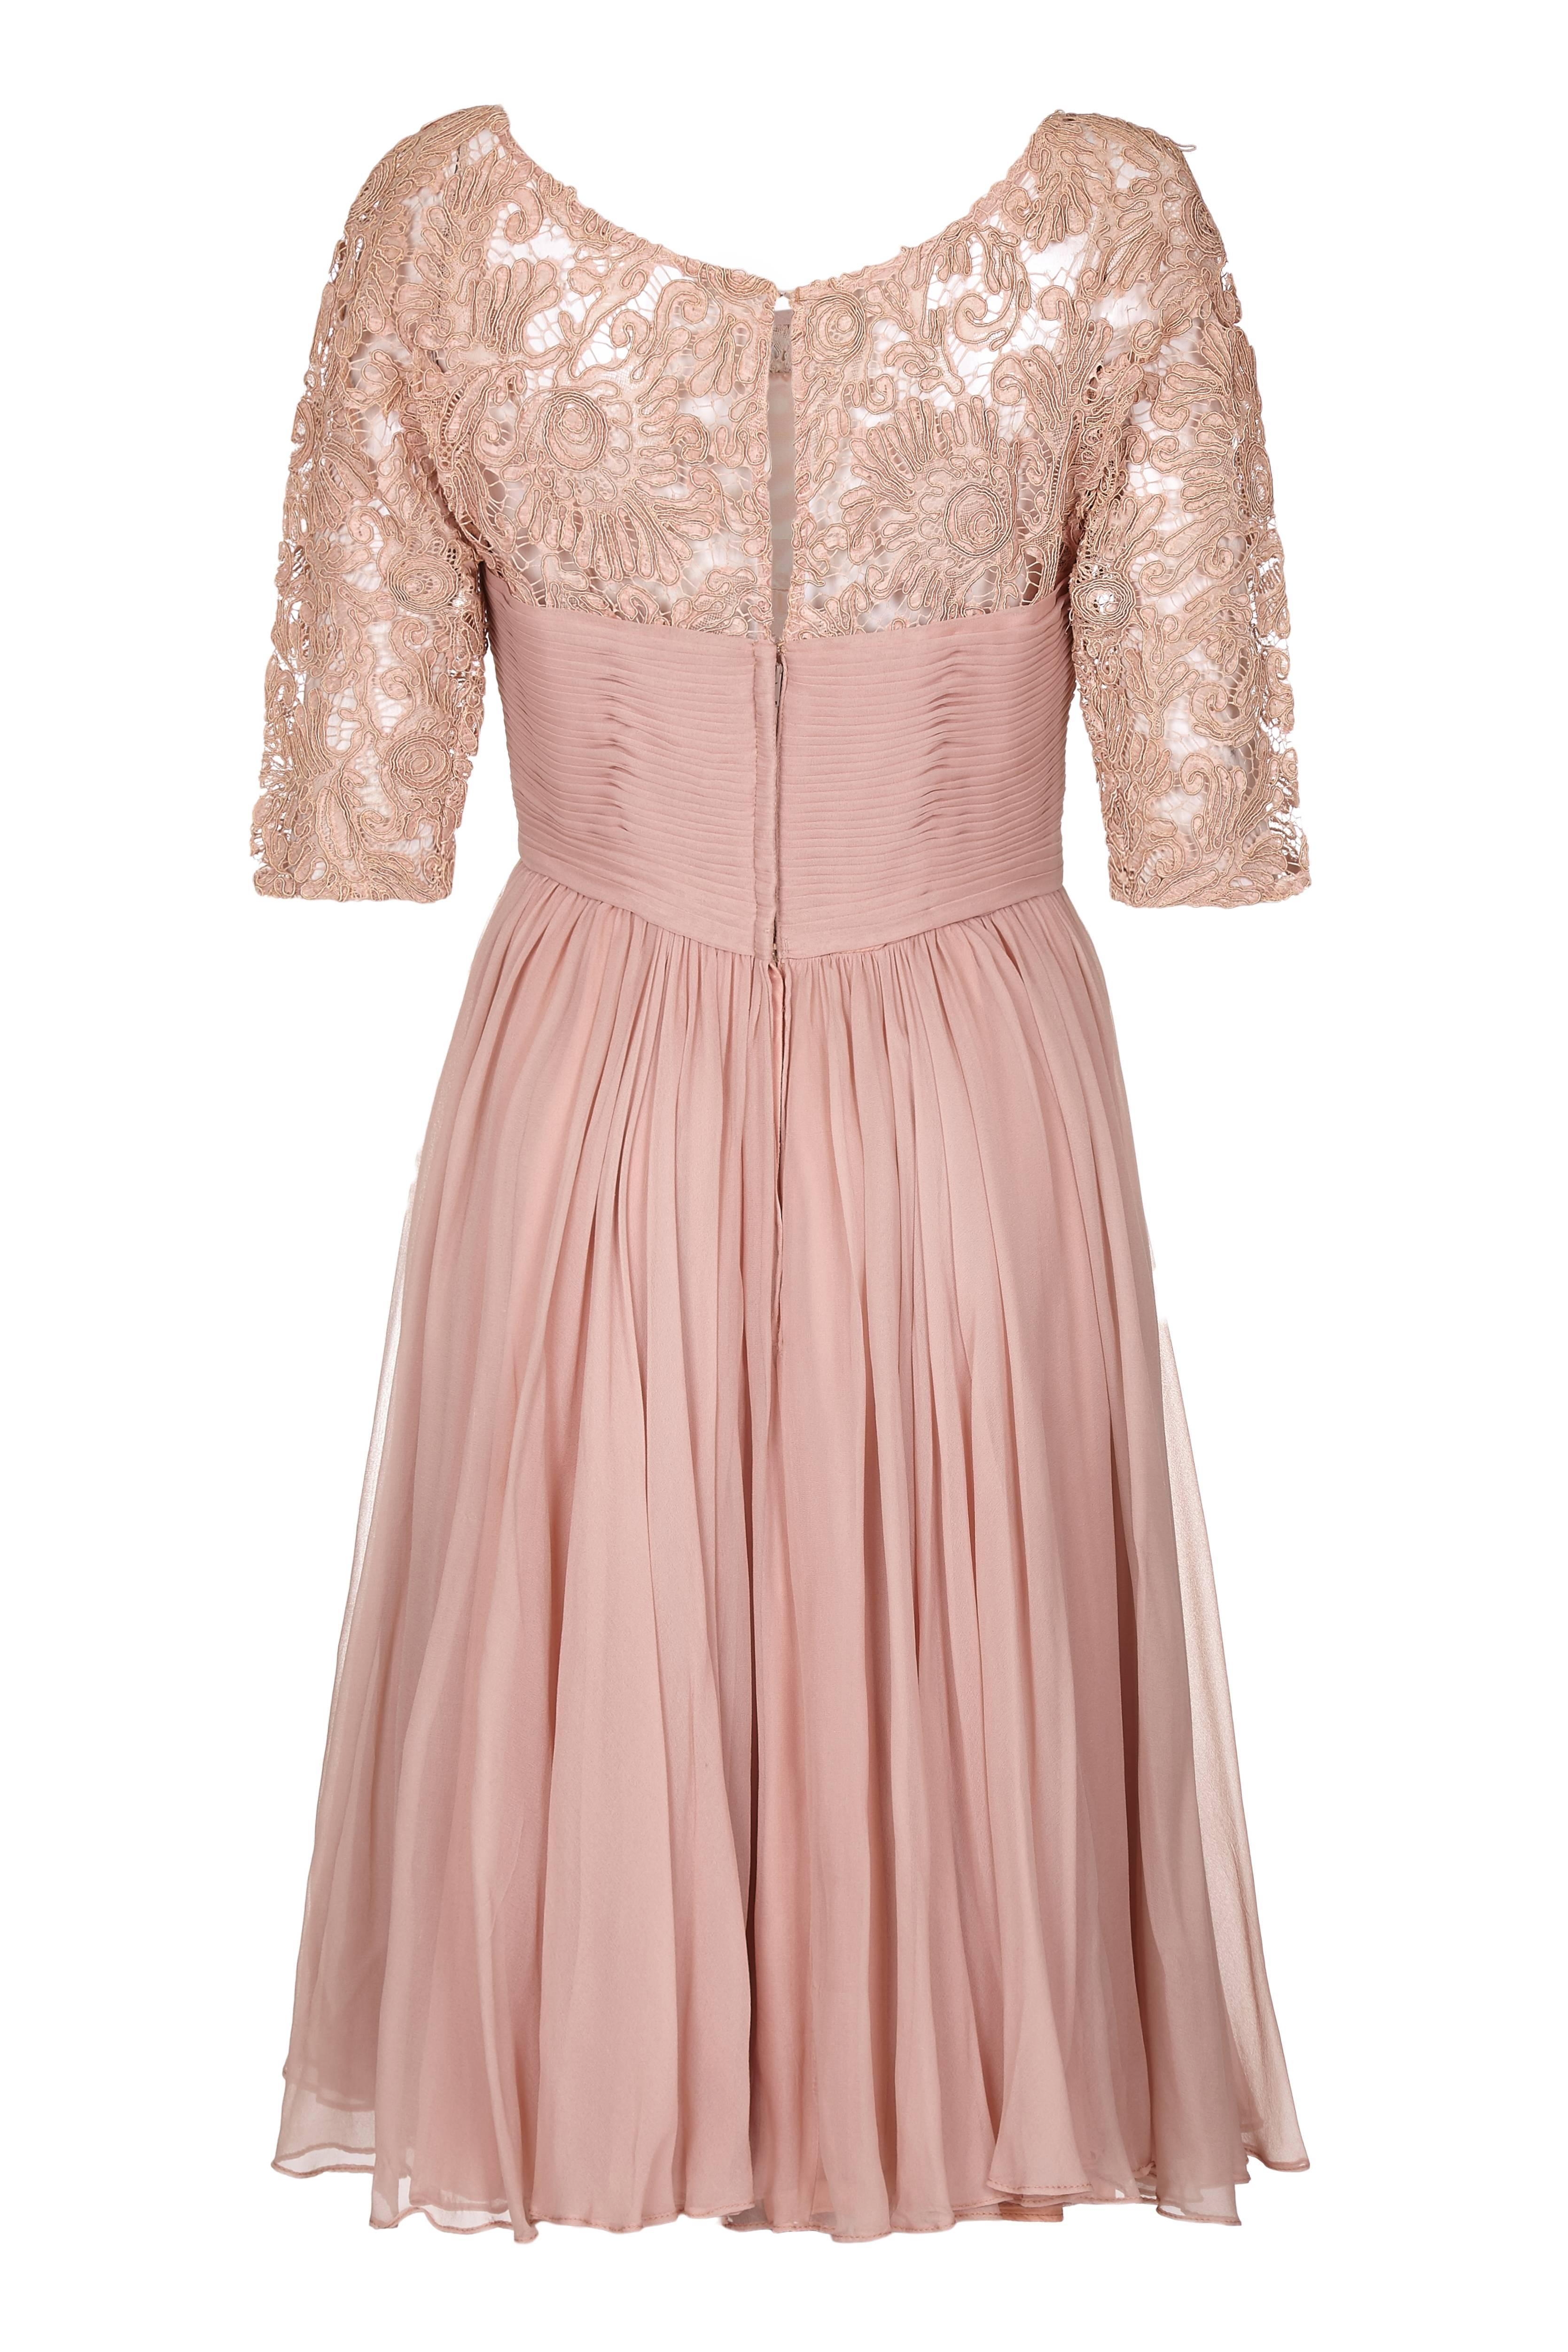 This charming 1950s Edward Abbott corded lace and silk chiffon dress in dusky pink is in excellent vintage condition and has beautiful construction. It features a fitted lace bodice with 3/4 length sleeves and double layer silk chiffon skirt with a